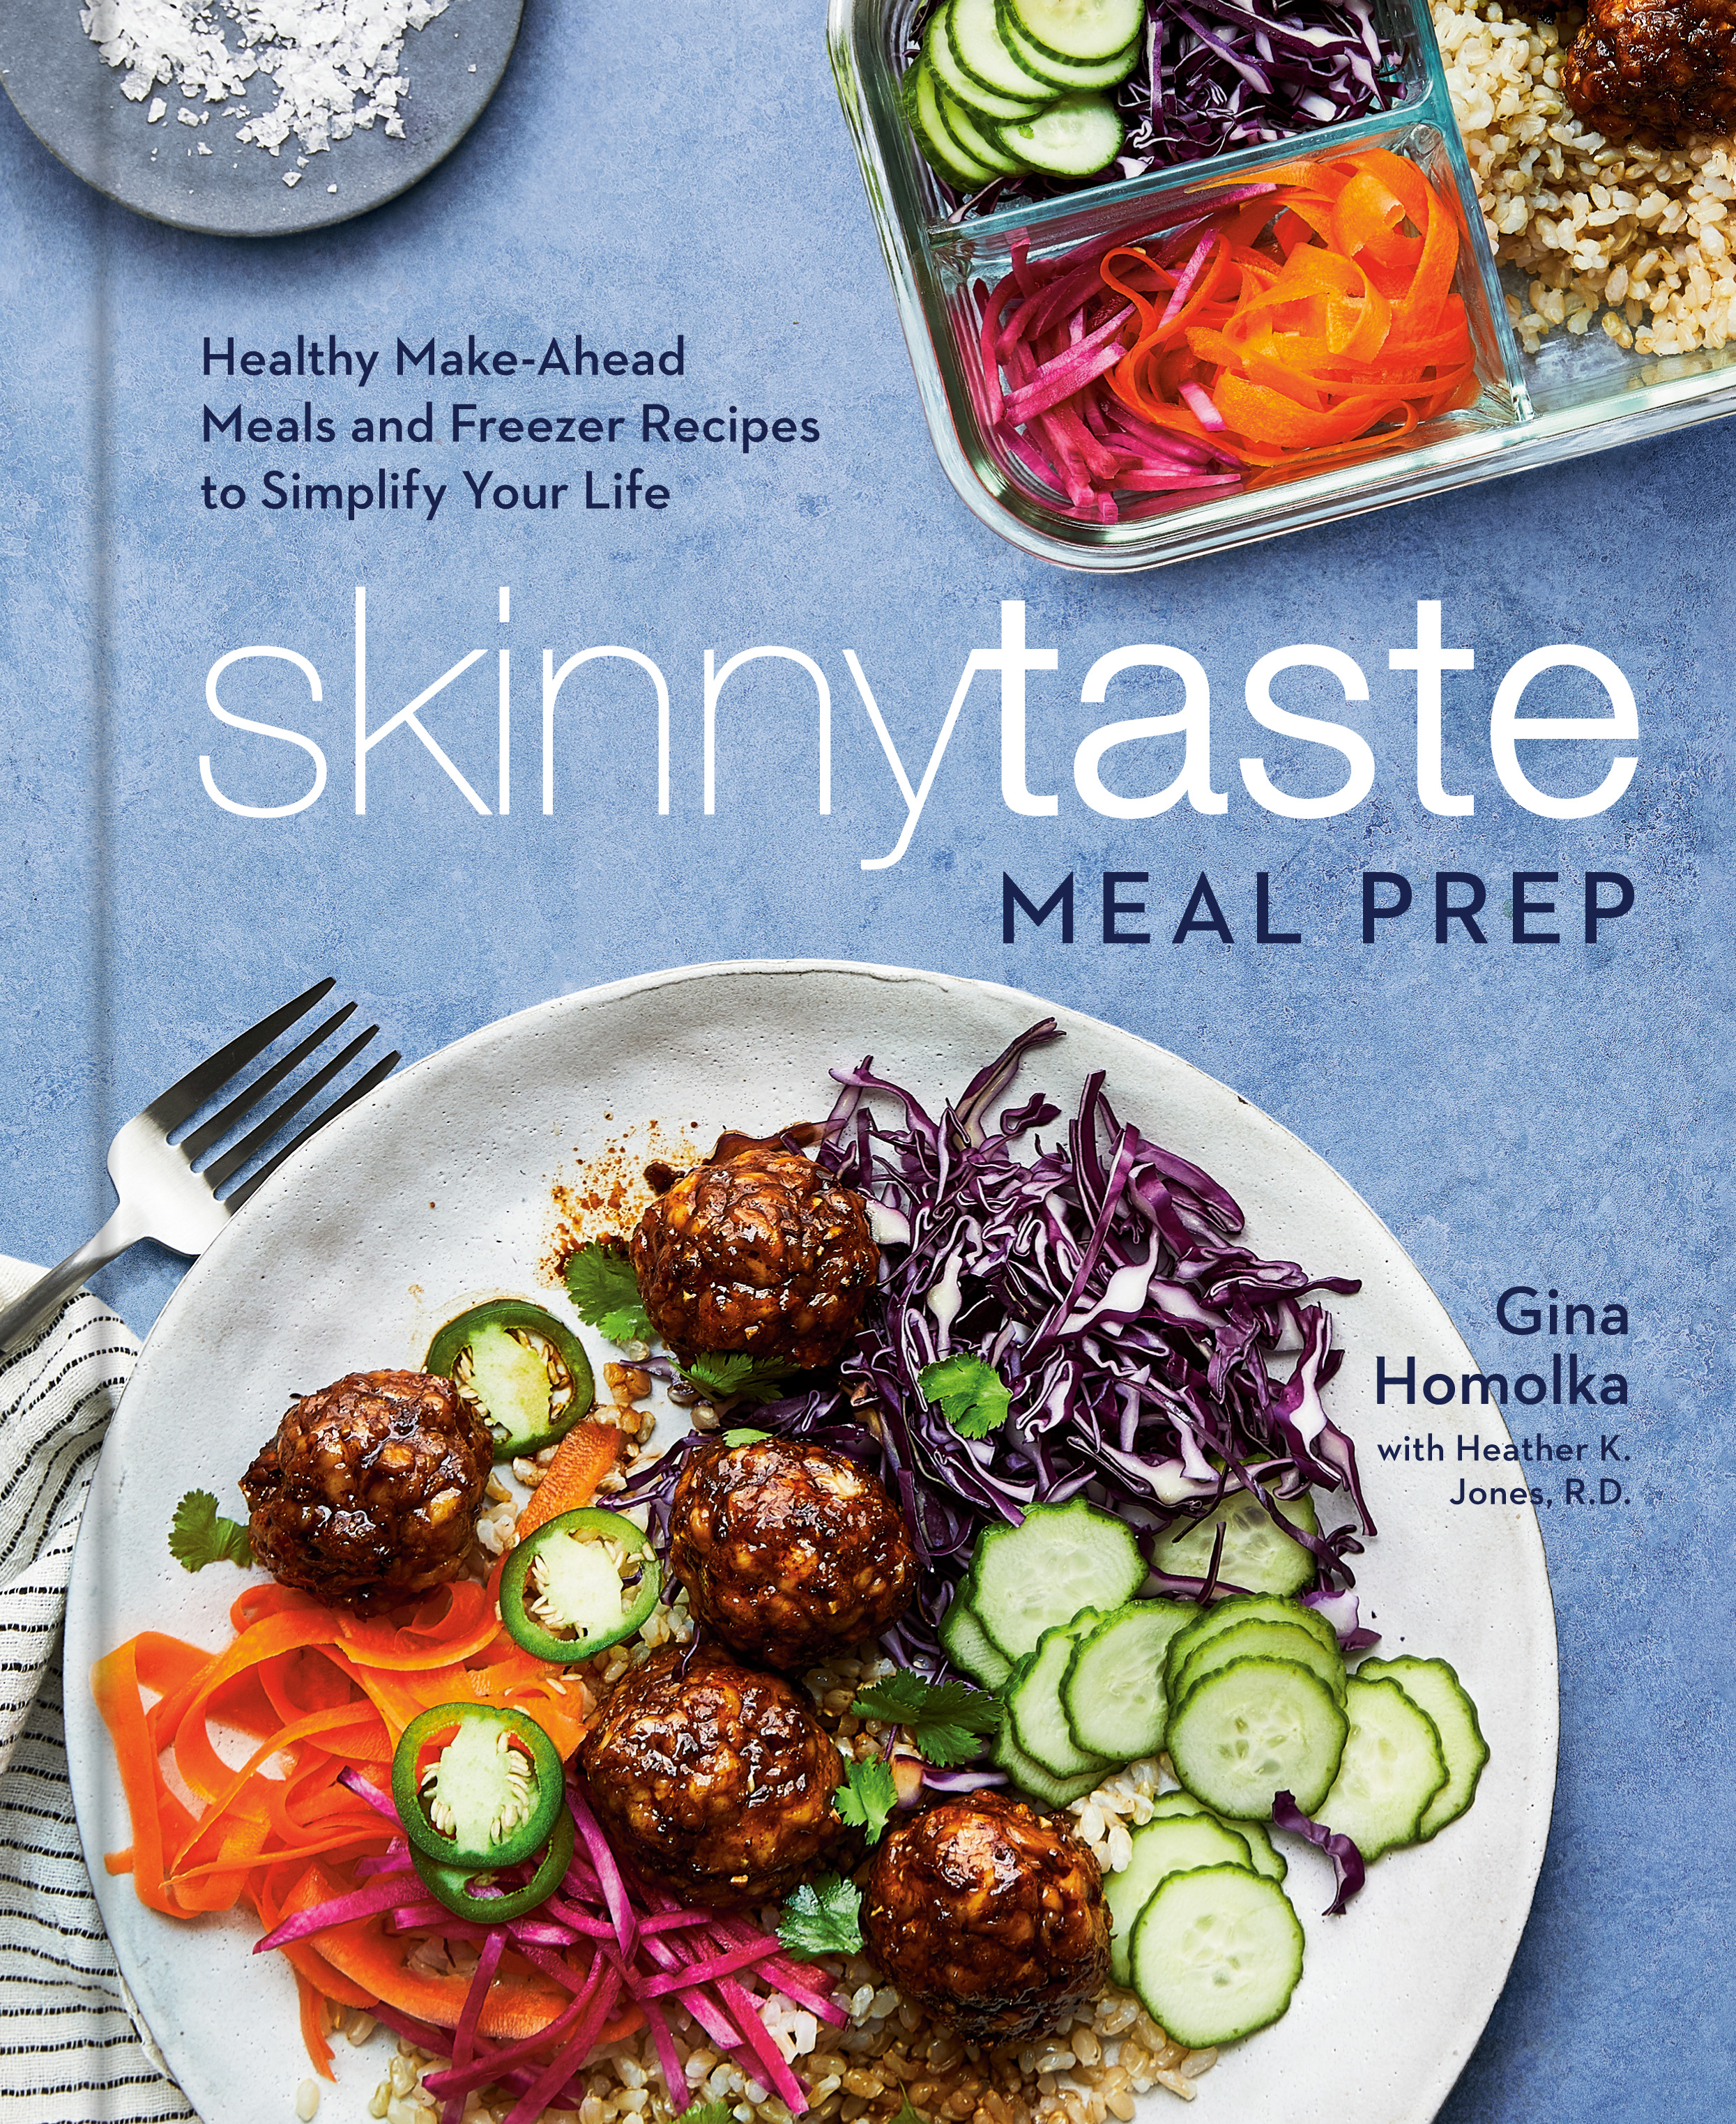 Skinnytaste Meal Prep : Healthy Make-Ahead Meals and Freezer Recipes to Simplify Your Life: A Cookbook | Homolka, Gina